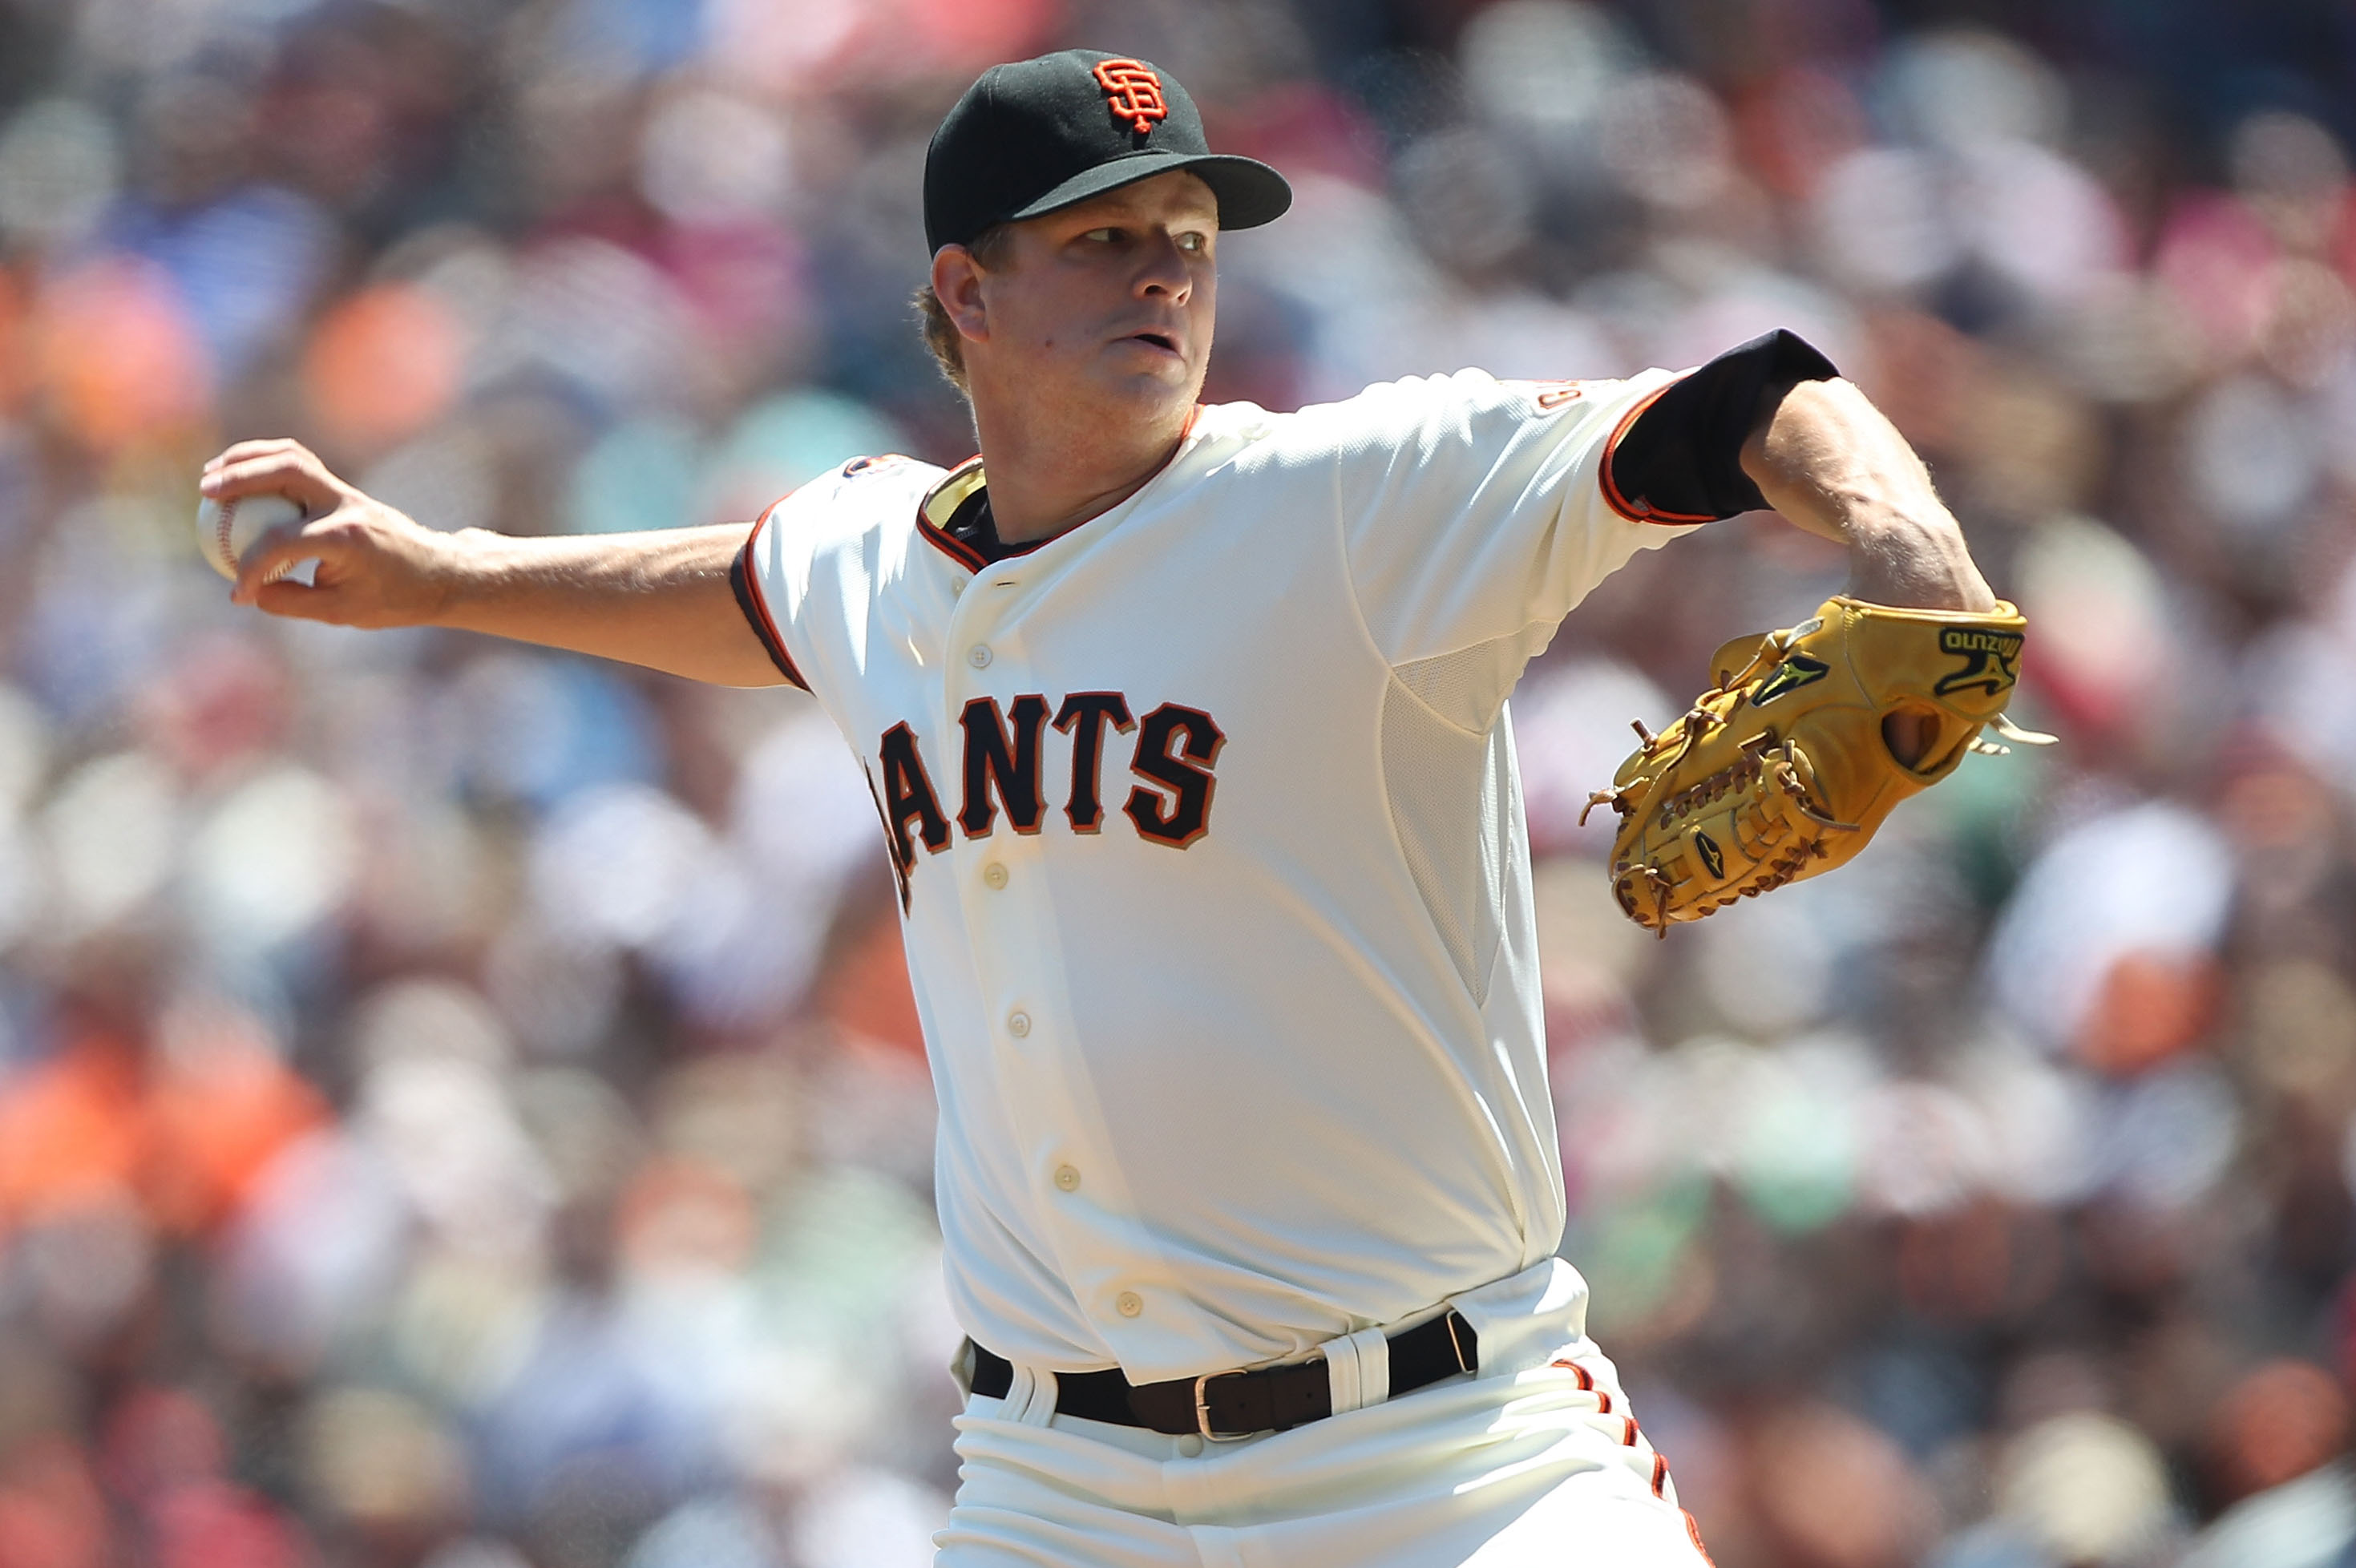 Giants sign Matt Cain to 5-year, $112.5 million contract extension 